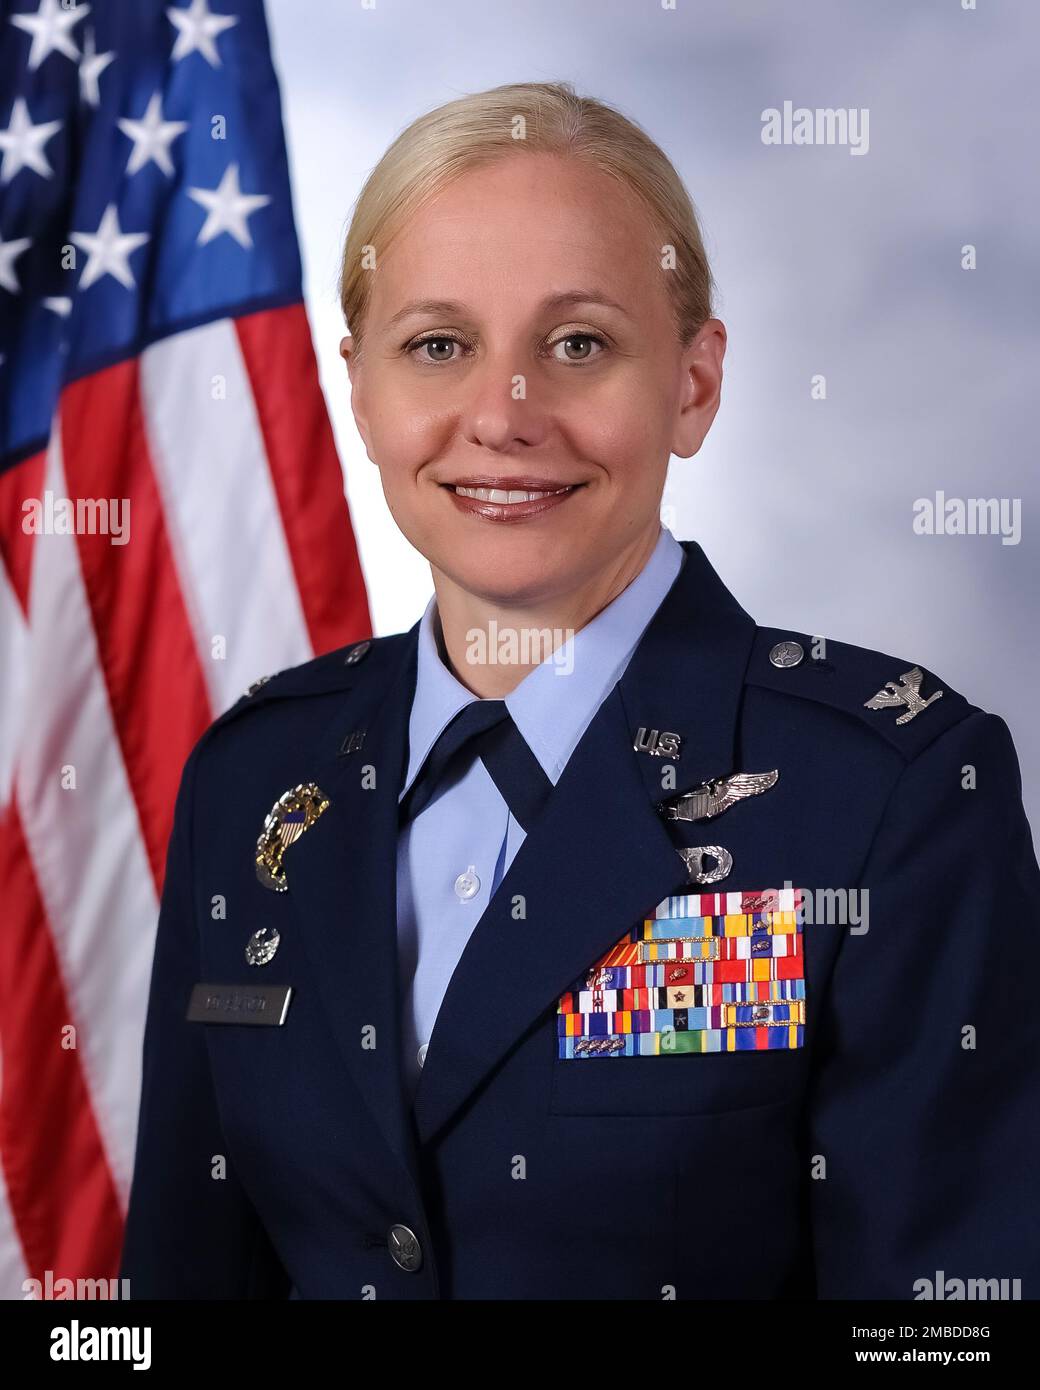 U.S. Air Force Colonel Michele Lo Bianco, 305th Operations Group commander, poses for an official photo on June 14, 2022 at Joint Base McGuire-Dix-Lakehurst, N.J. Lo Bianco will serve as the 15th Wing commander at Joint Base Pearl Harbor-Hickam. Stock Photo